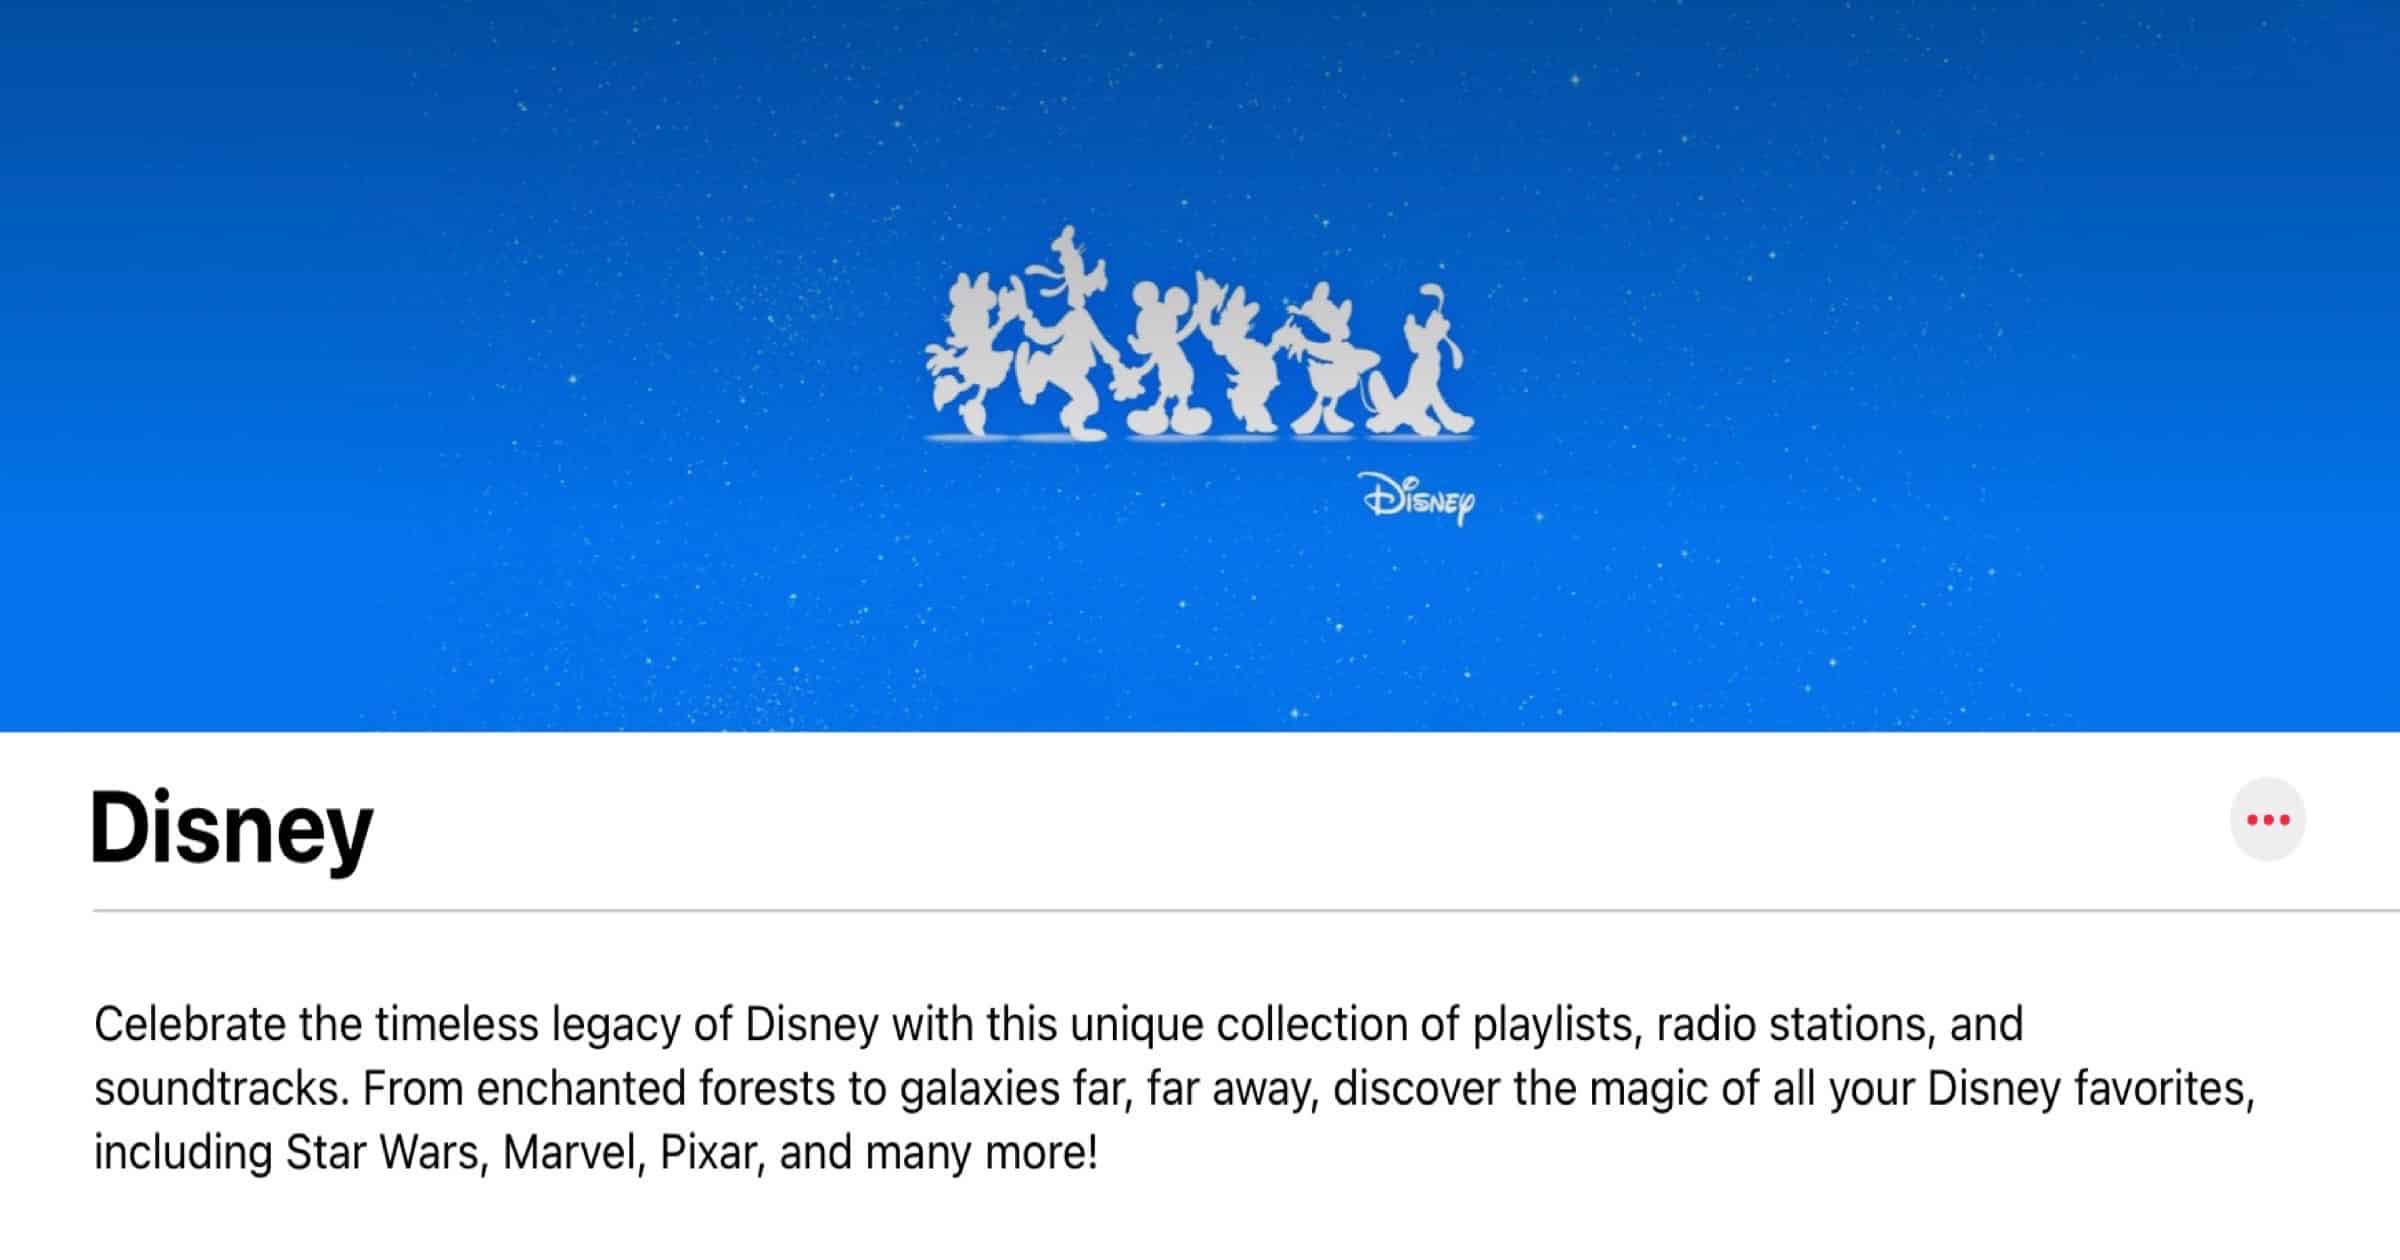 Apple Music has a New Disney Section for Songs